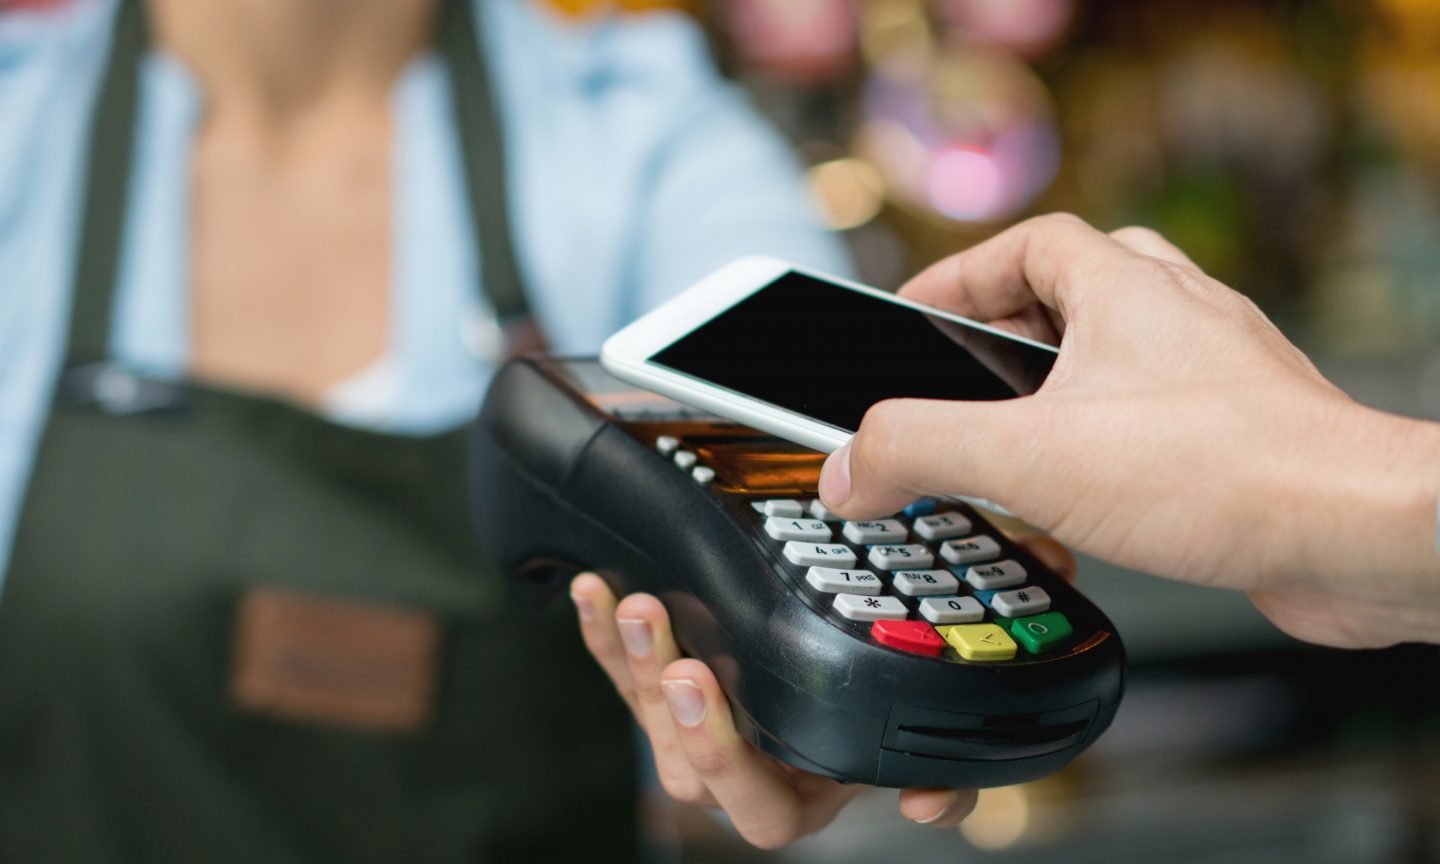 What Is a Point-of-Sale (POS) System and How Does It Work? - NerdWallet